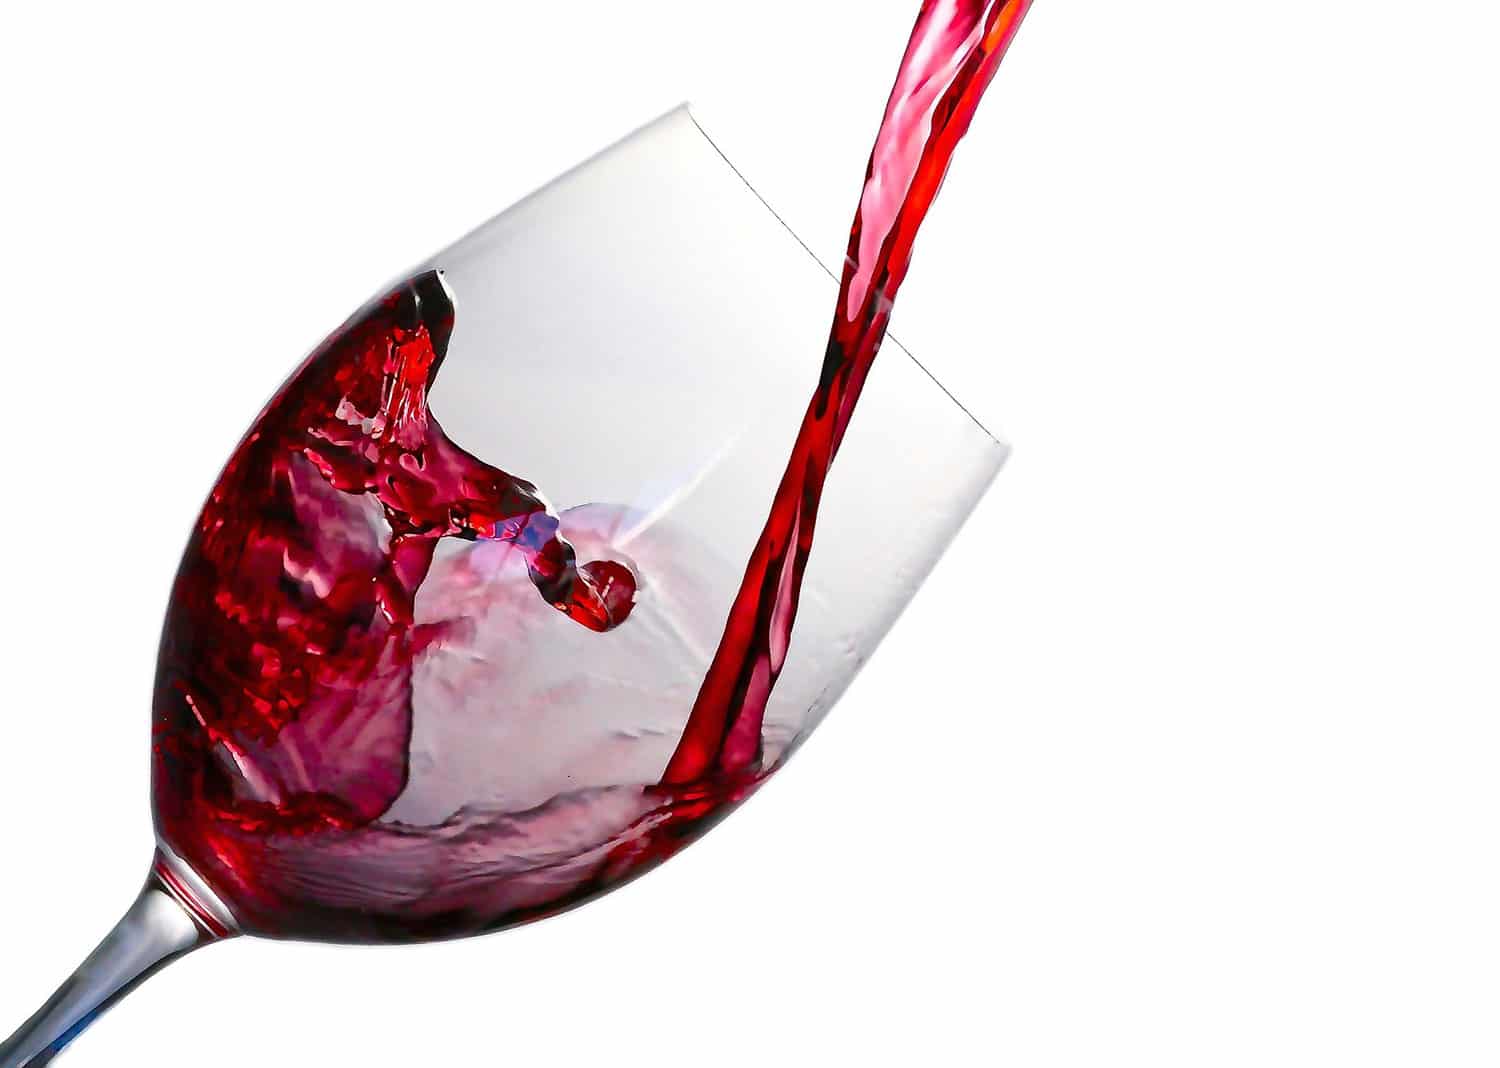 New electronic nose identifies the quality of a red wine.